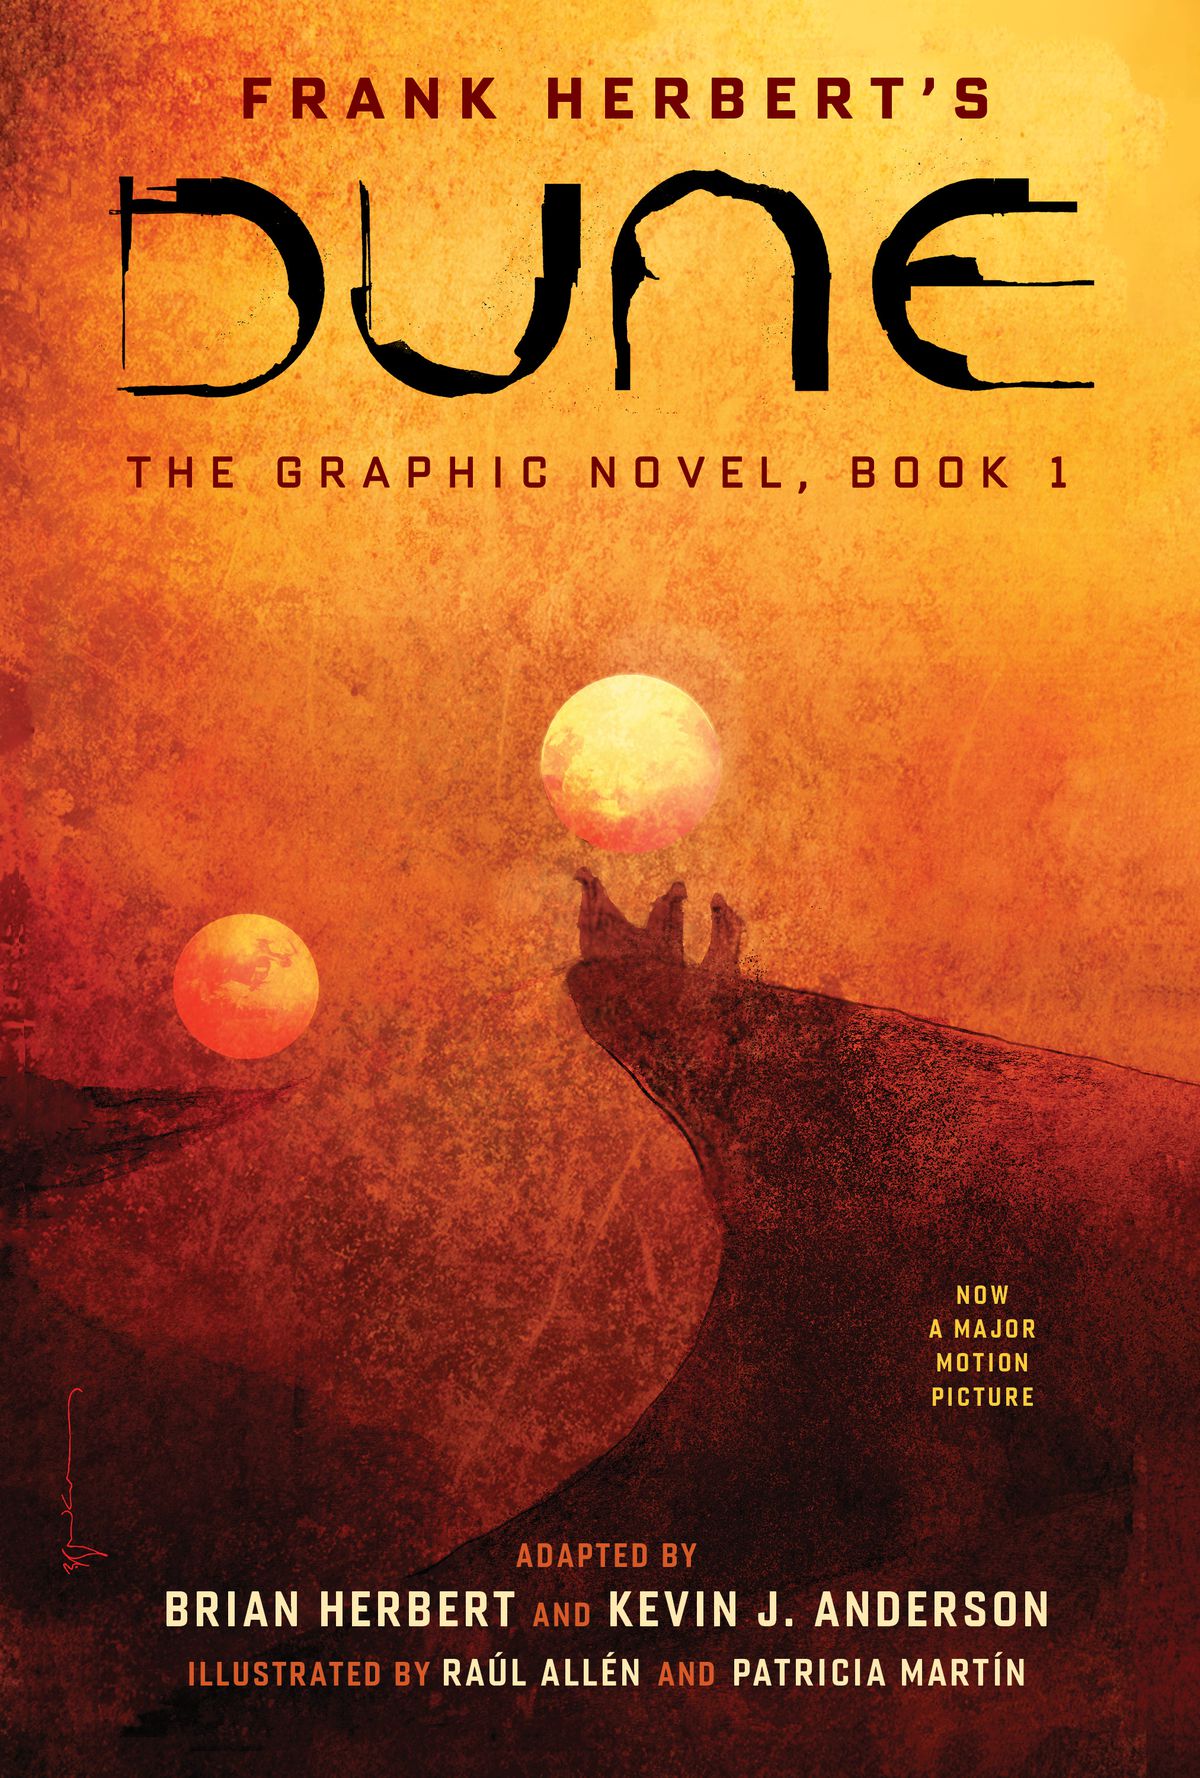 Cover art, and text, for Dune: The Graphic Novel, Book 1